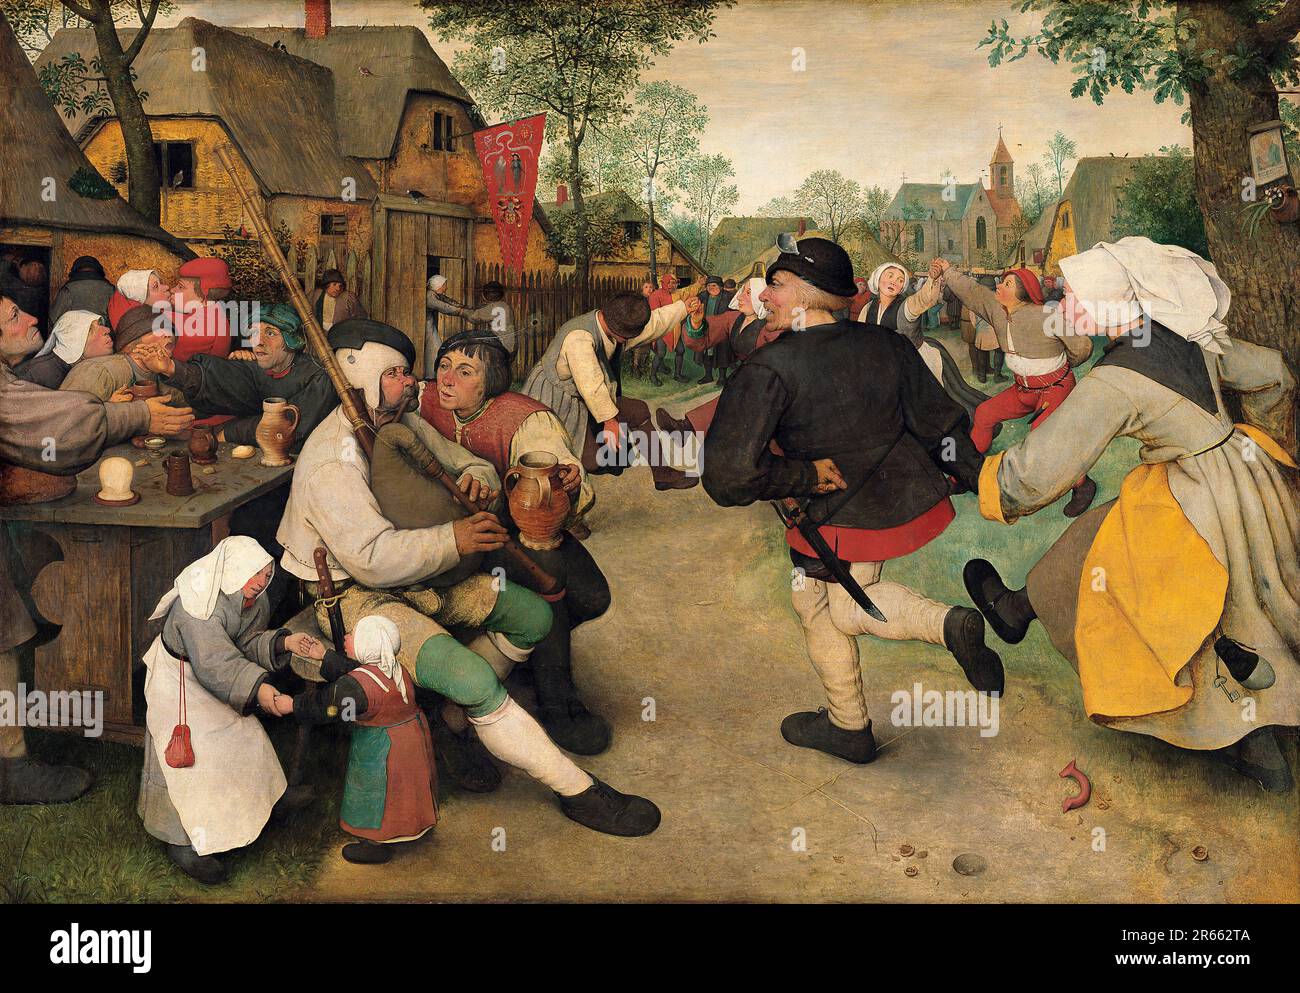 The Peasant Dance  painted by the Dutch Renaissance painter Pieter Breughel the Elder in 1568. Breughel was the most important painter of the Dutch and Flemish Renaissance. His choice of subjects was influential, he rejected portraits and religious scenes in favour of local and peasant scenes. Stock Photo